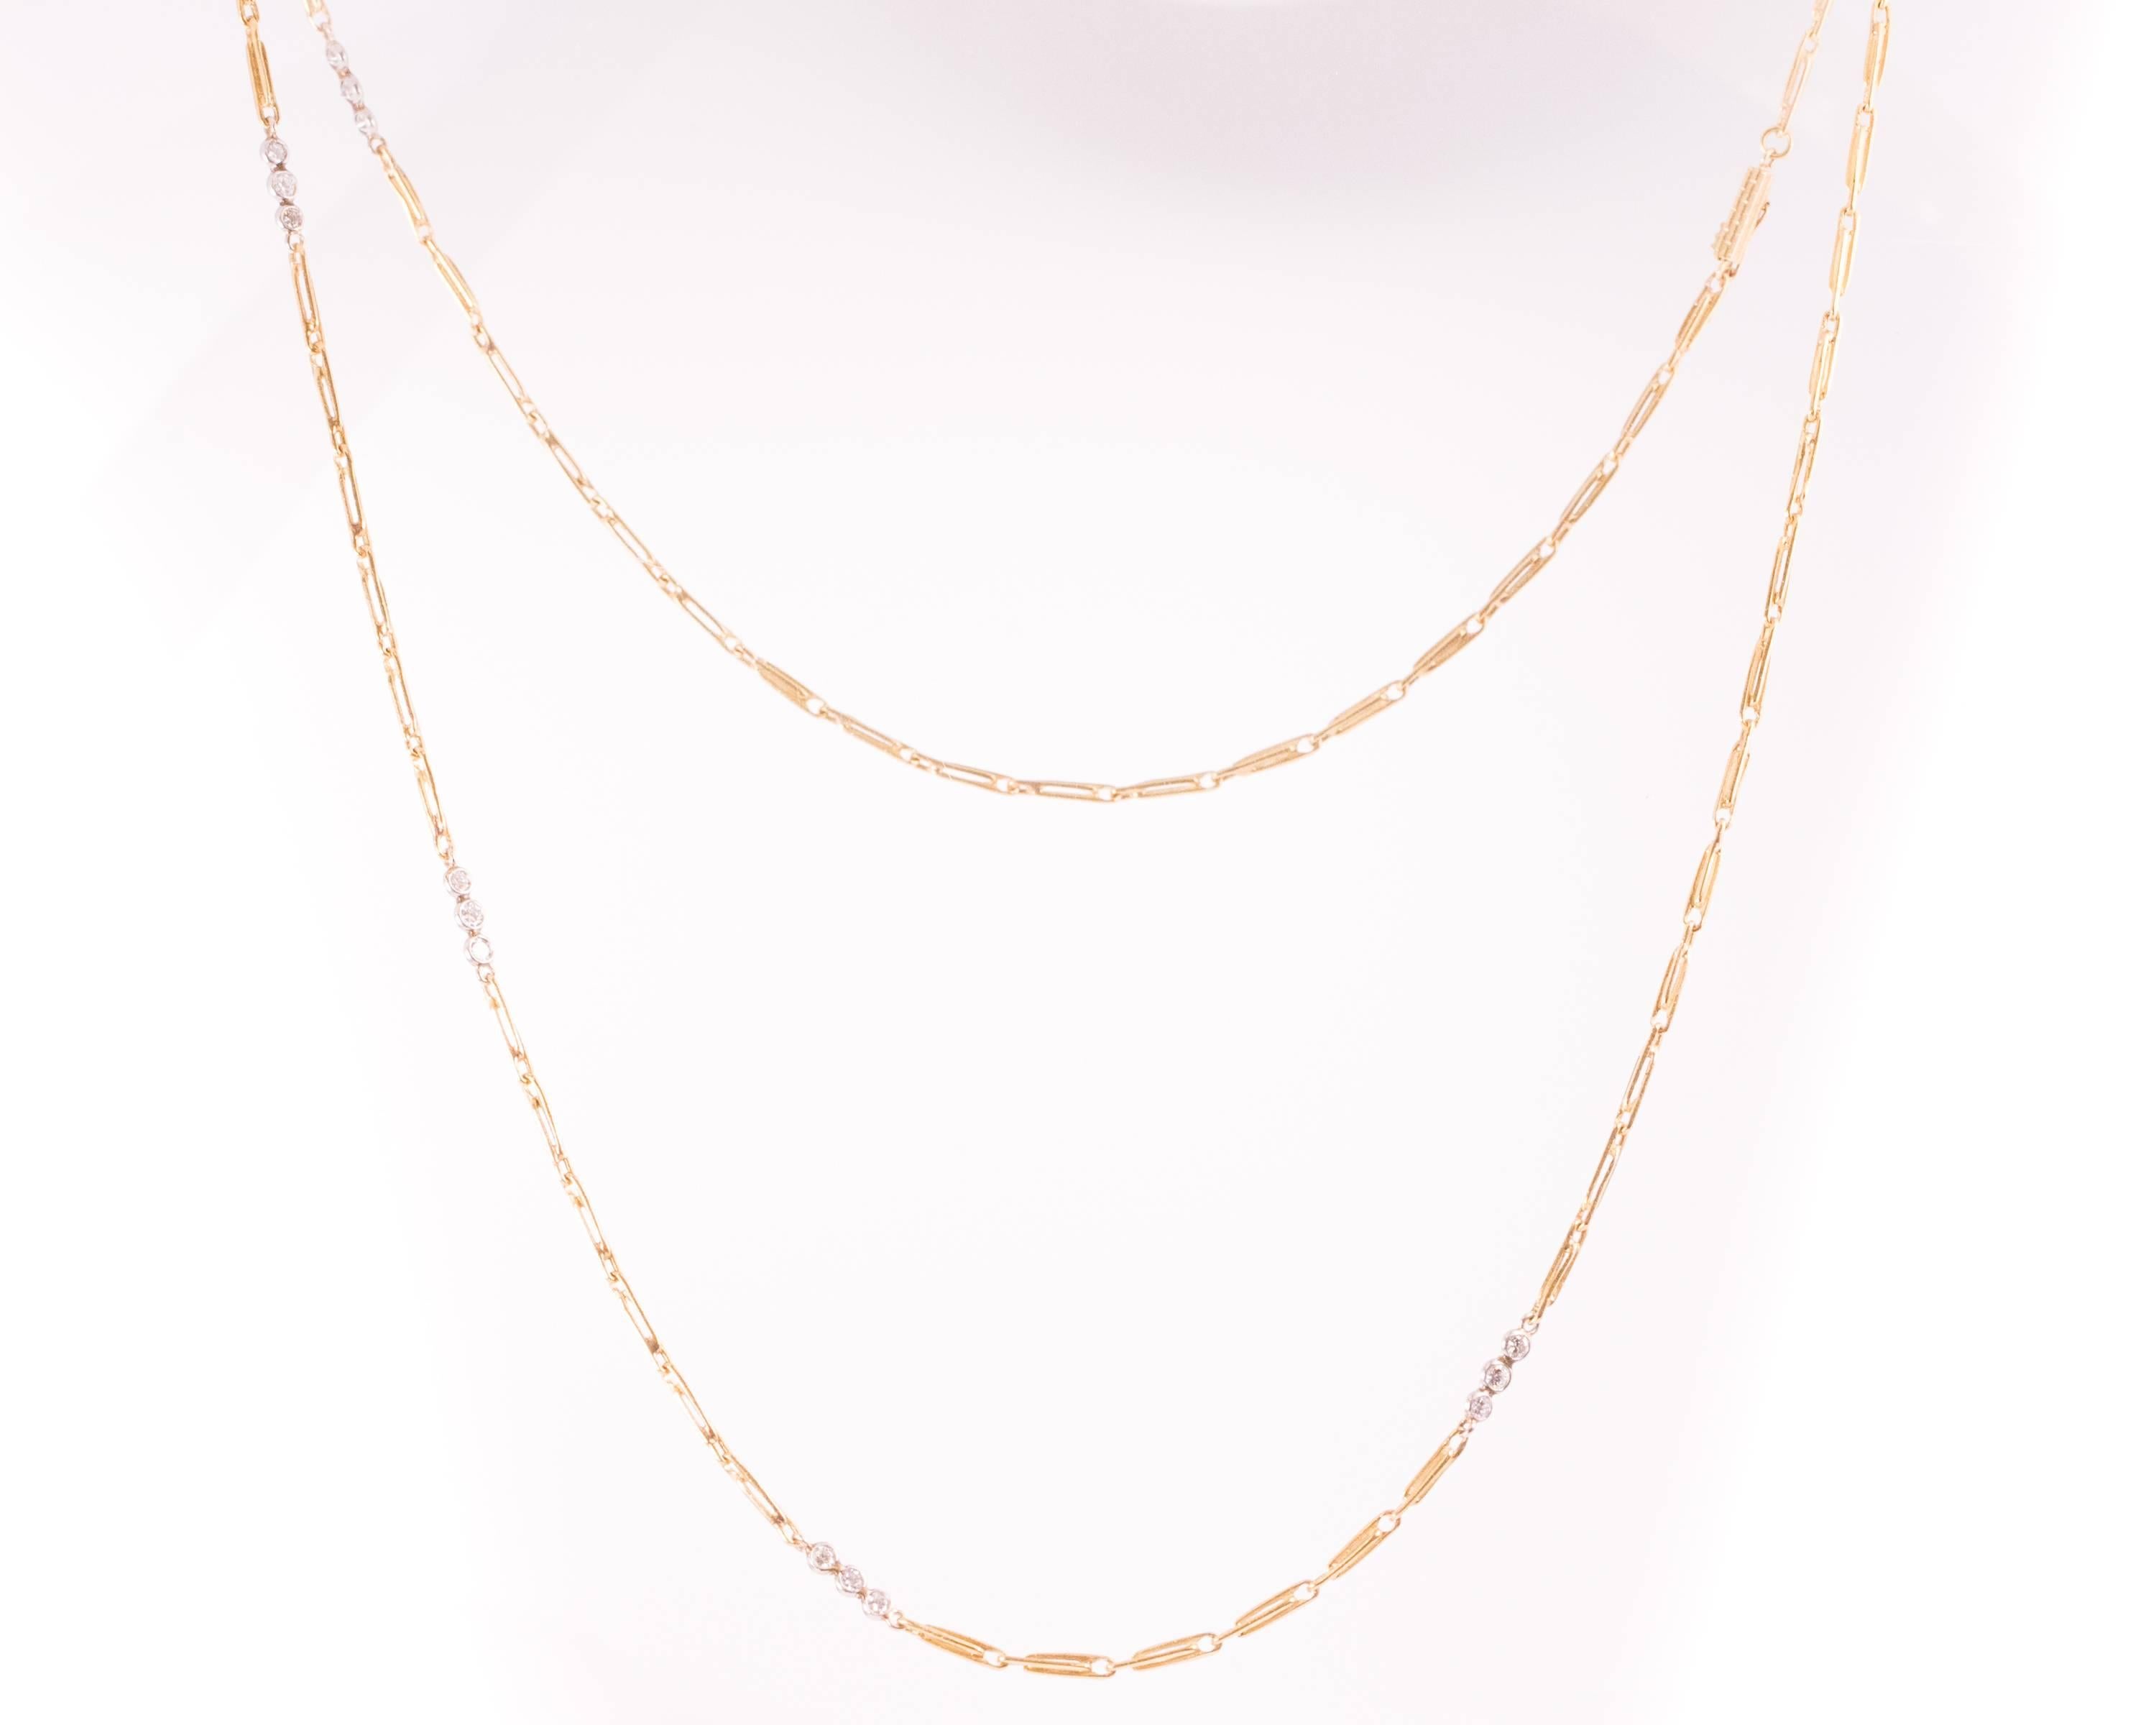 This 1930s Art Deco 18 karat yellow gold link Necklace features Transitional European cut Diamonds. Each handmade gold link is comprised of two interlocking links. 
Features a total of 1.00 carat of Transitional European cut diamonds, these are